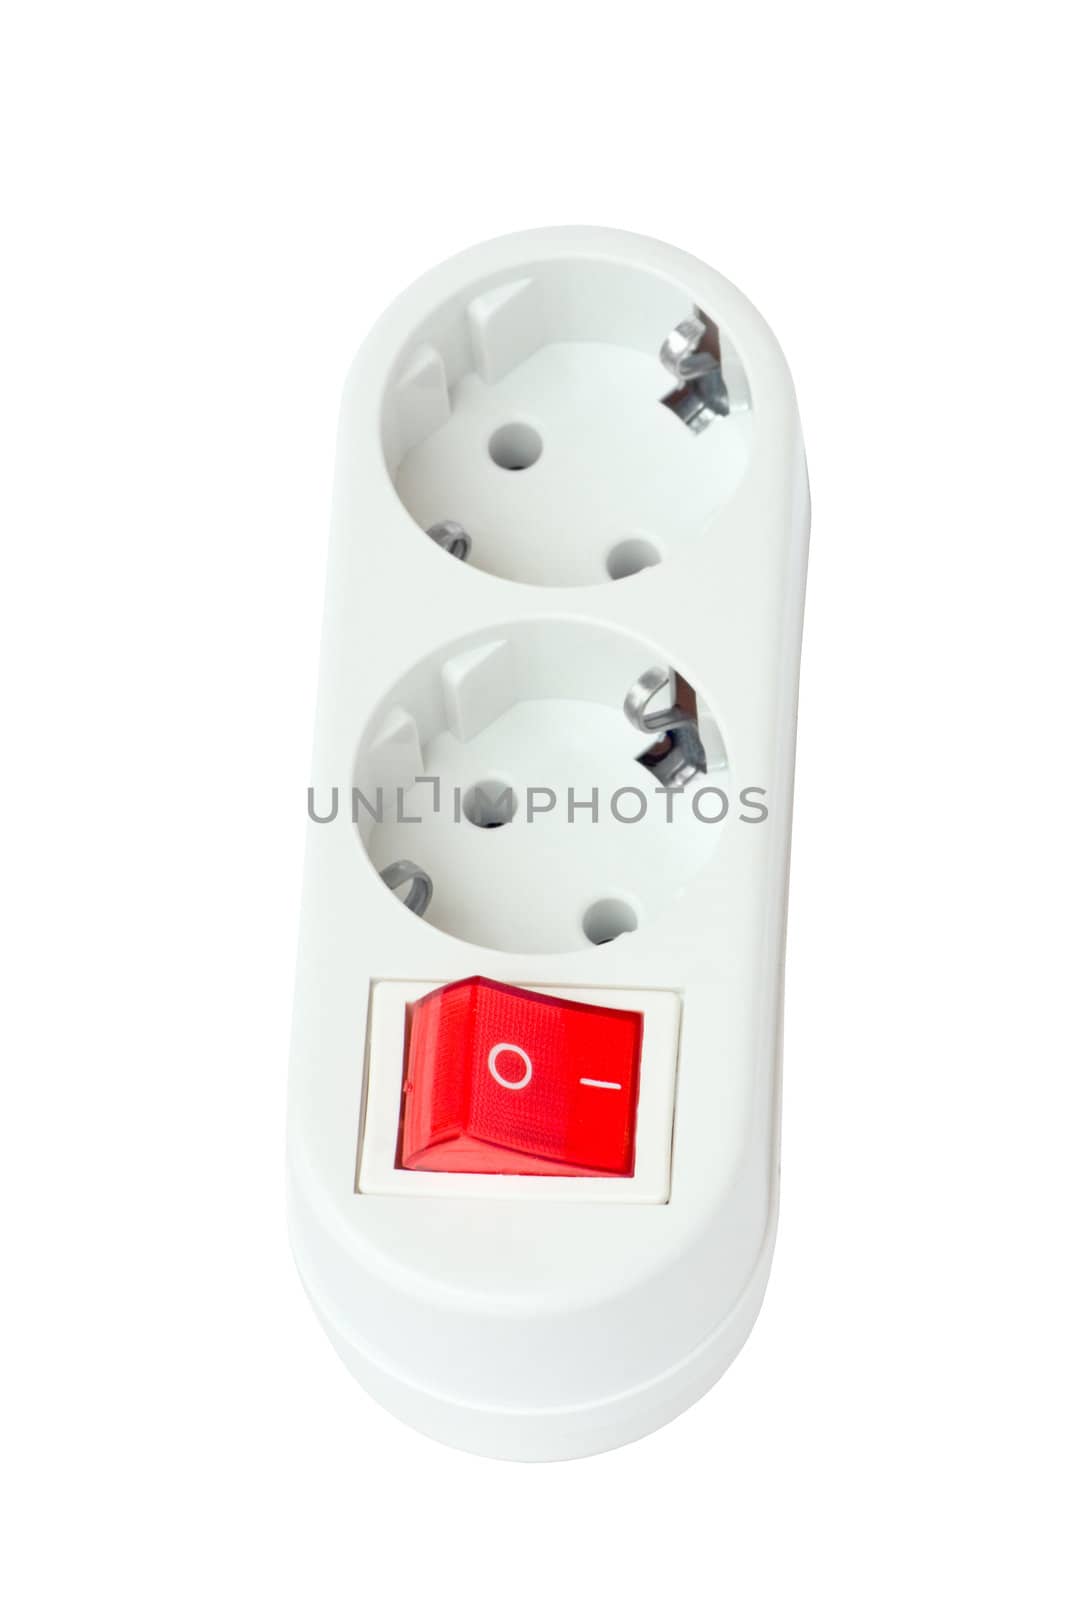 An electric socket - a splitter with a switch, isolated on a white background.